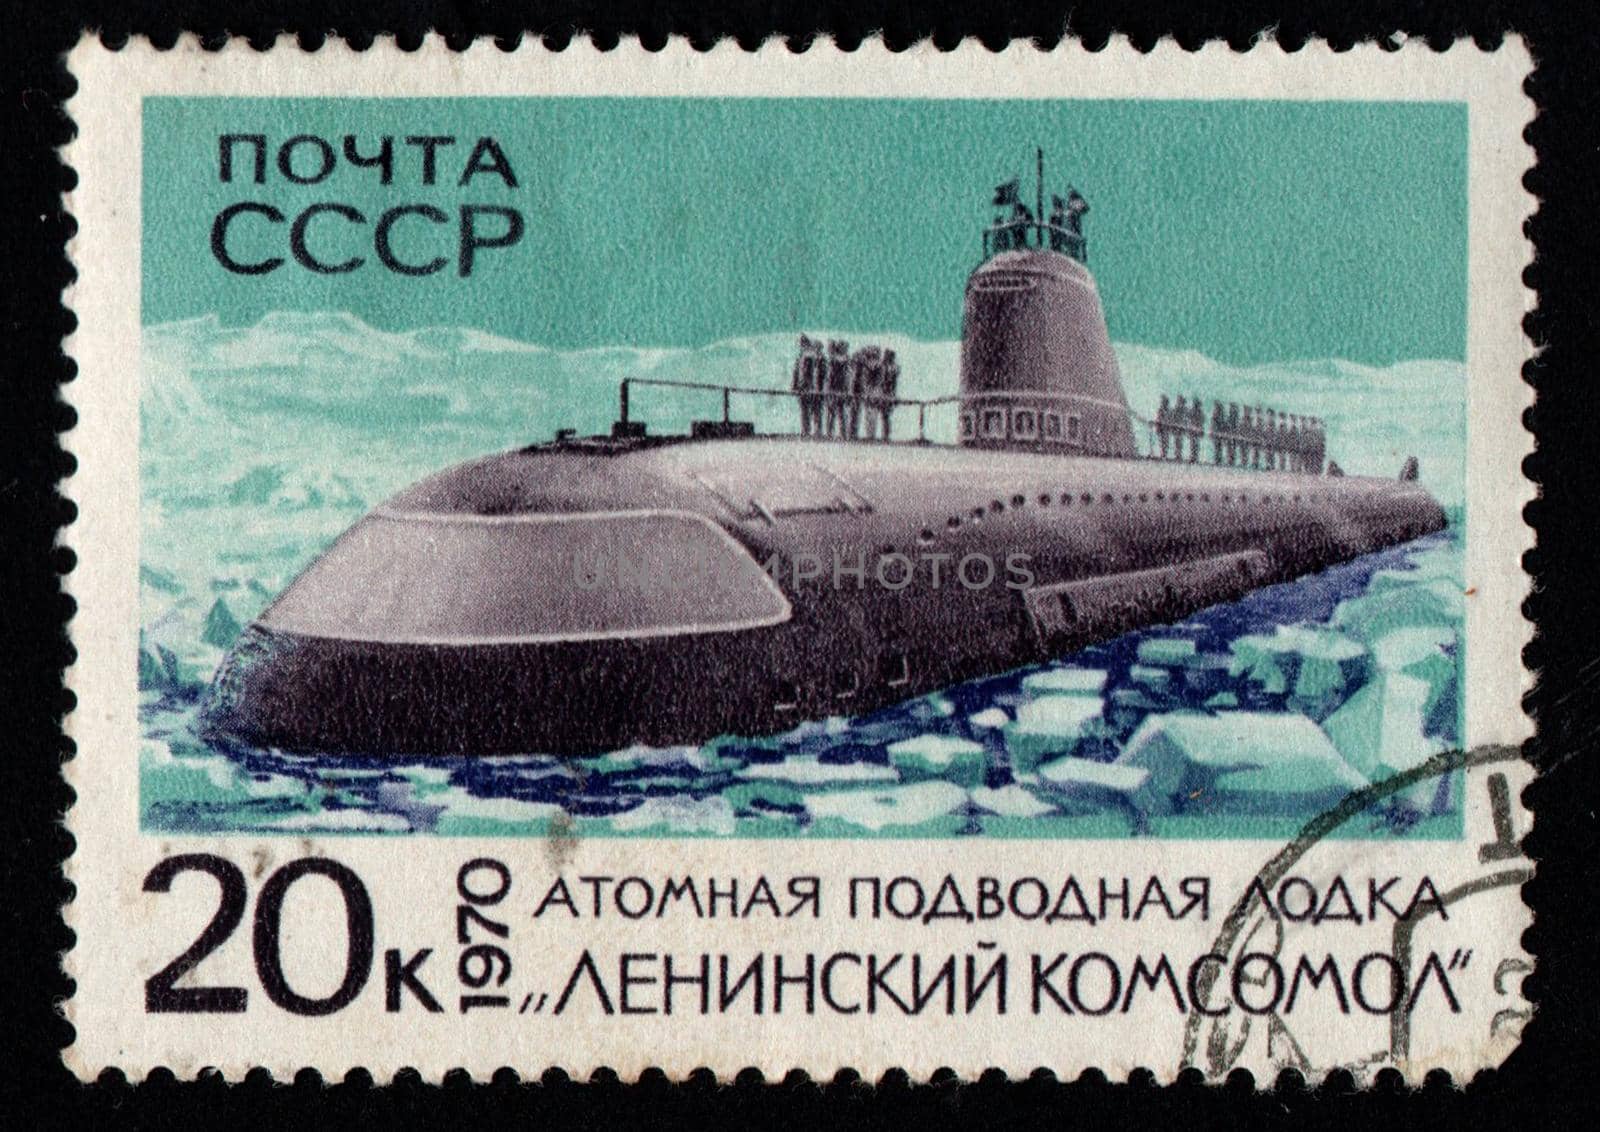 USSR postage stamp dedicated to Soviet nuclear submarine by alexmak